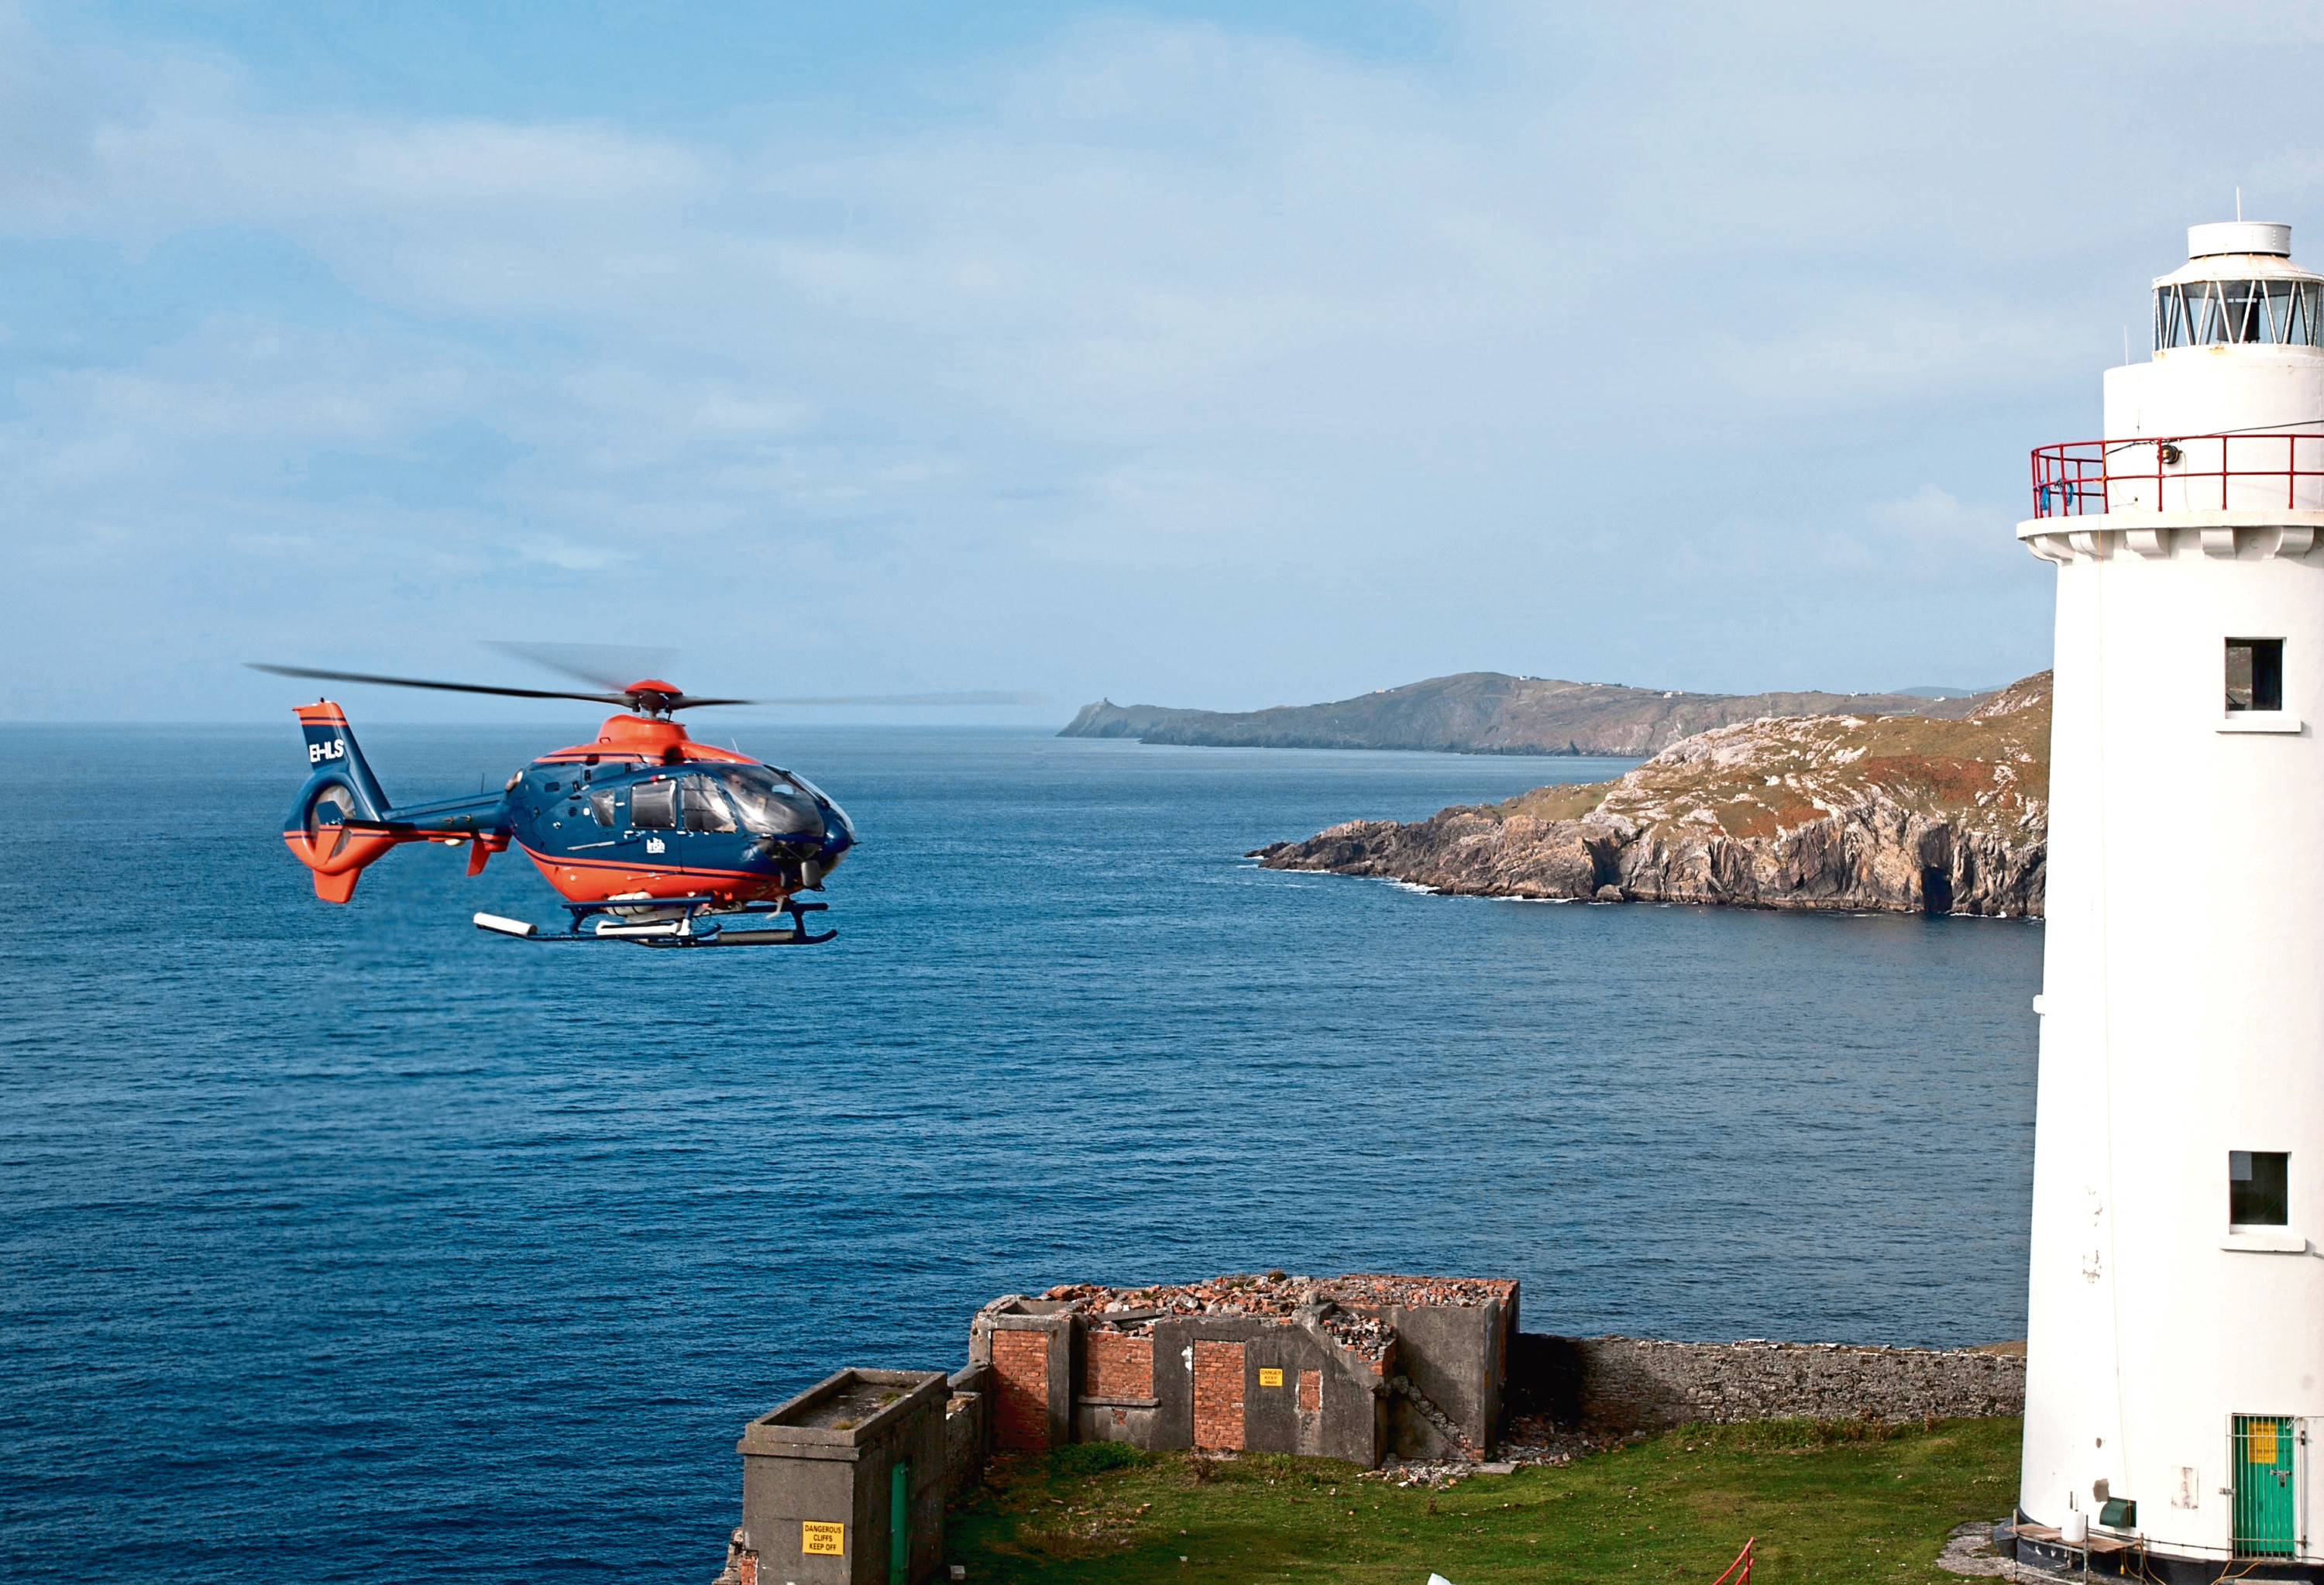 PDG Helicopters (subsidiary Irish Helicopters) EC 135 Helicopter carrying out mobilisation of materials at Ardnakinna Lighthouse (County Cork) in preparation for planned lighthouse maintenance. Ardnakinna Lighthouse is owned and operated by the Commissioners of Irish Lights.